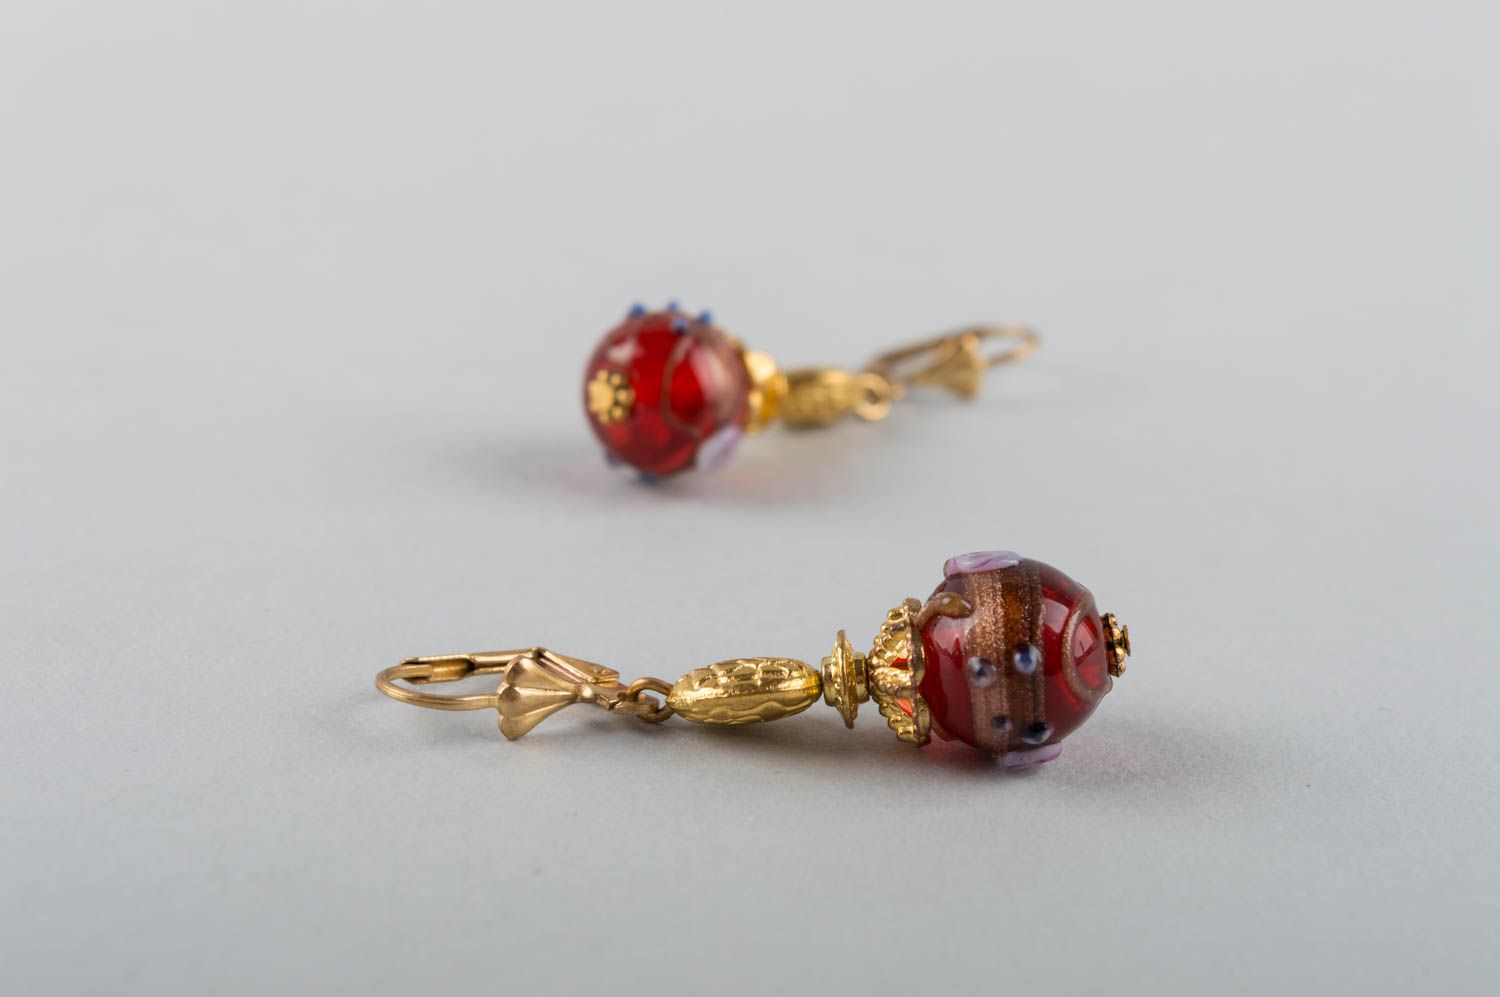 Handmade luxurious dangling earrings with golden colored basis and mural glass photo 5